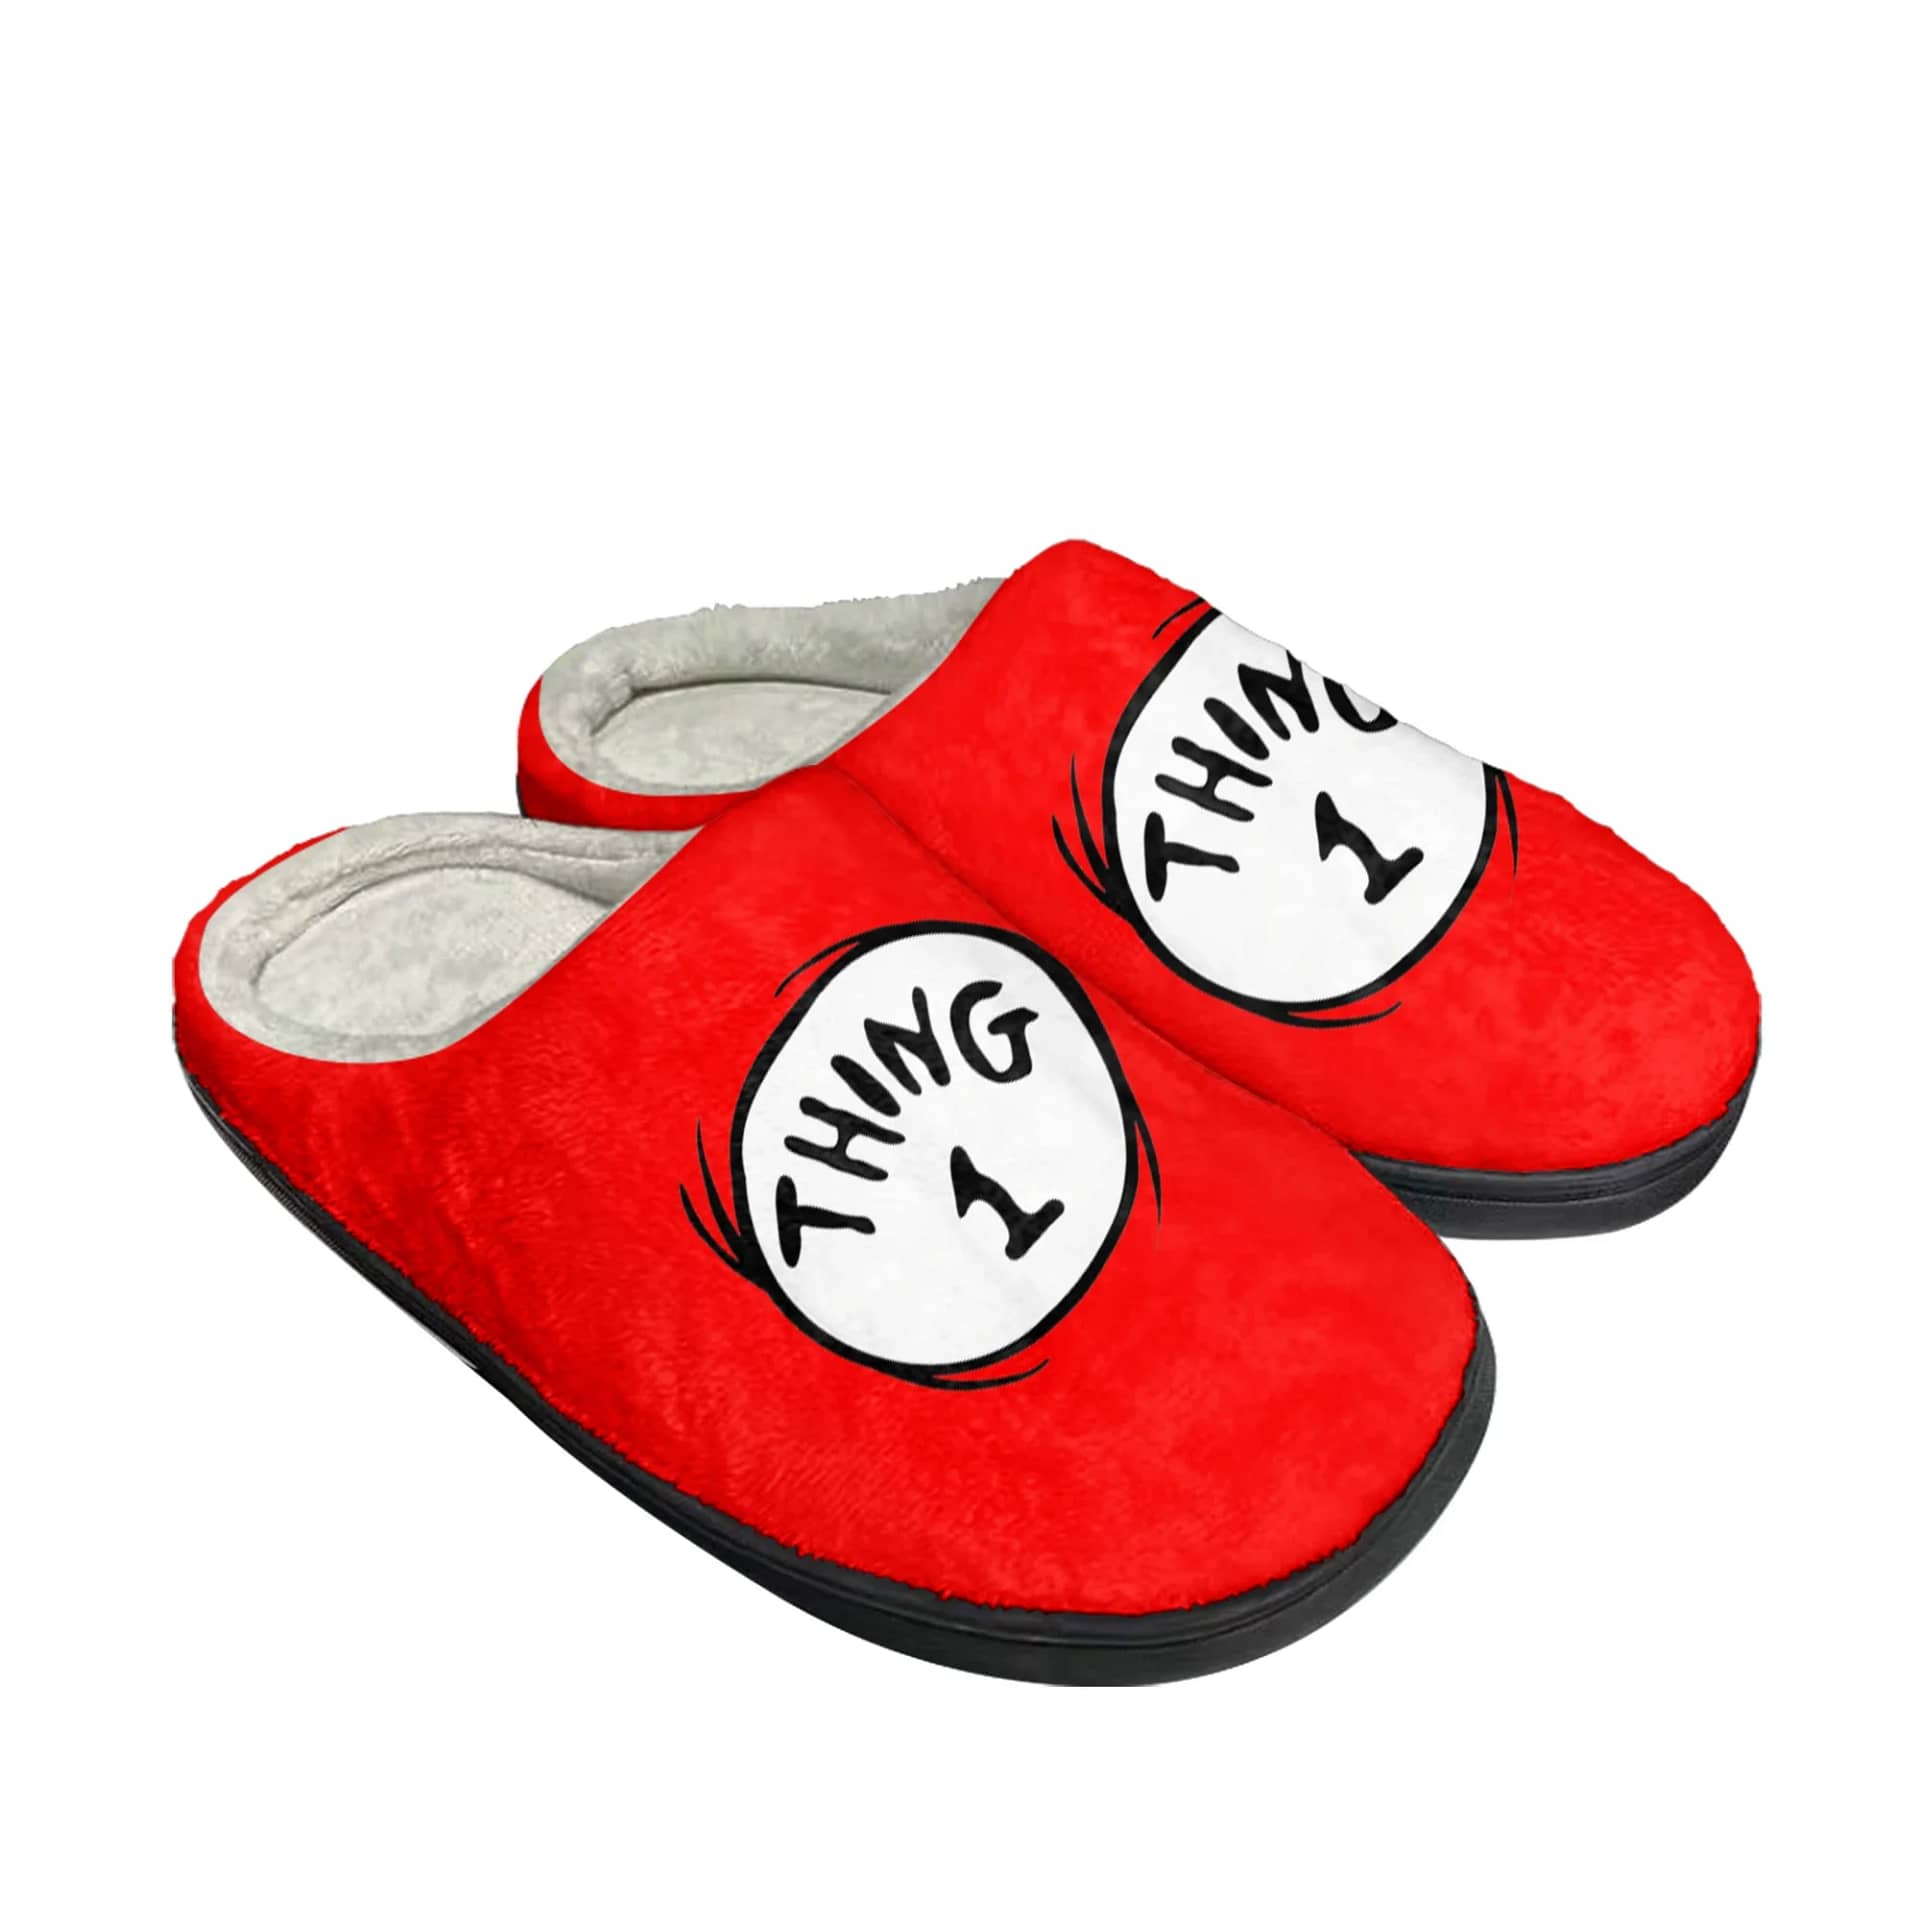 Thing Red Thing 1 Custom Shoes Slippers